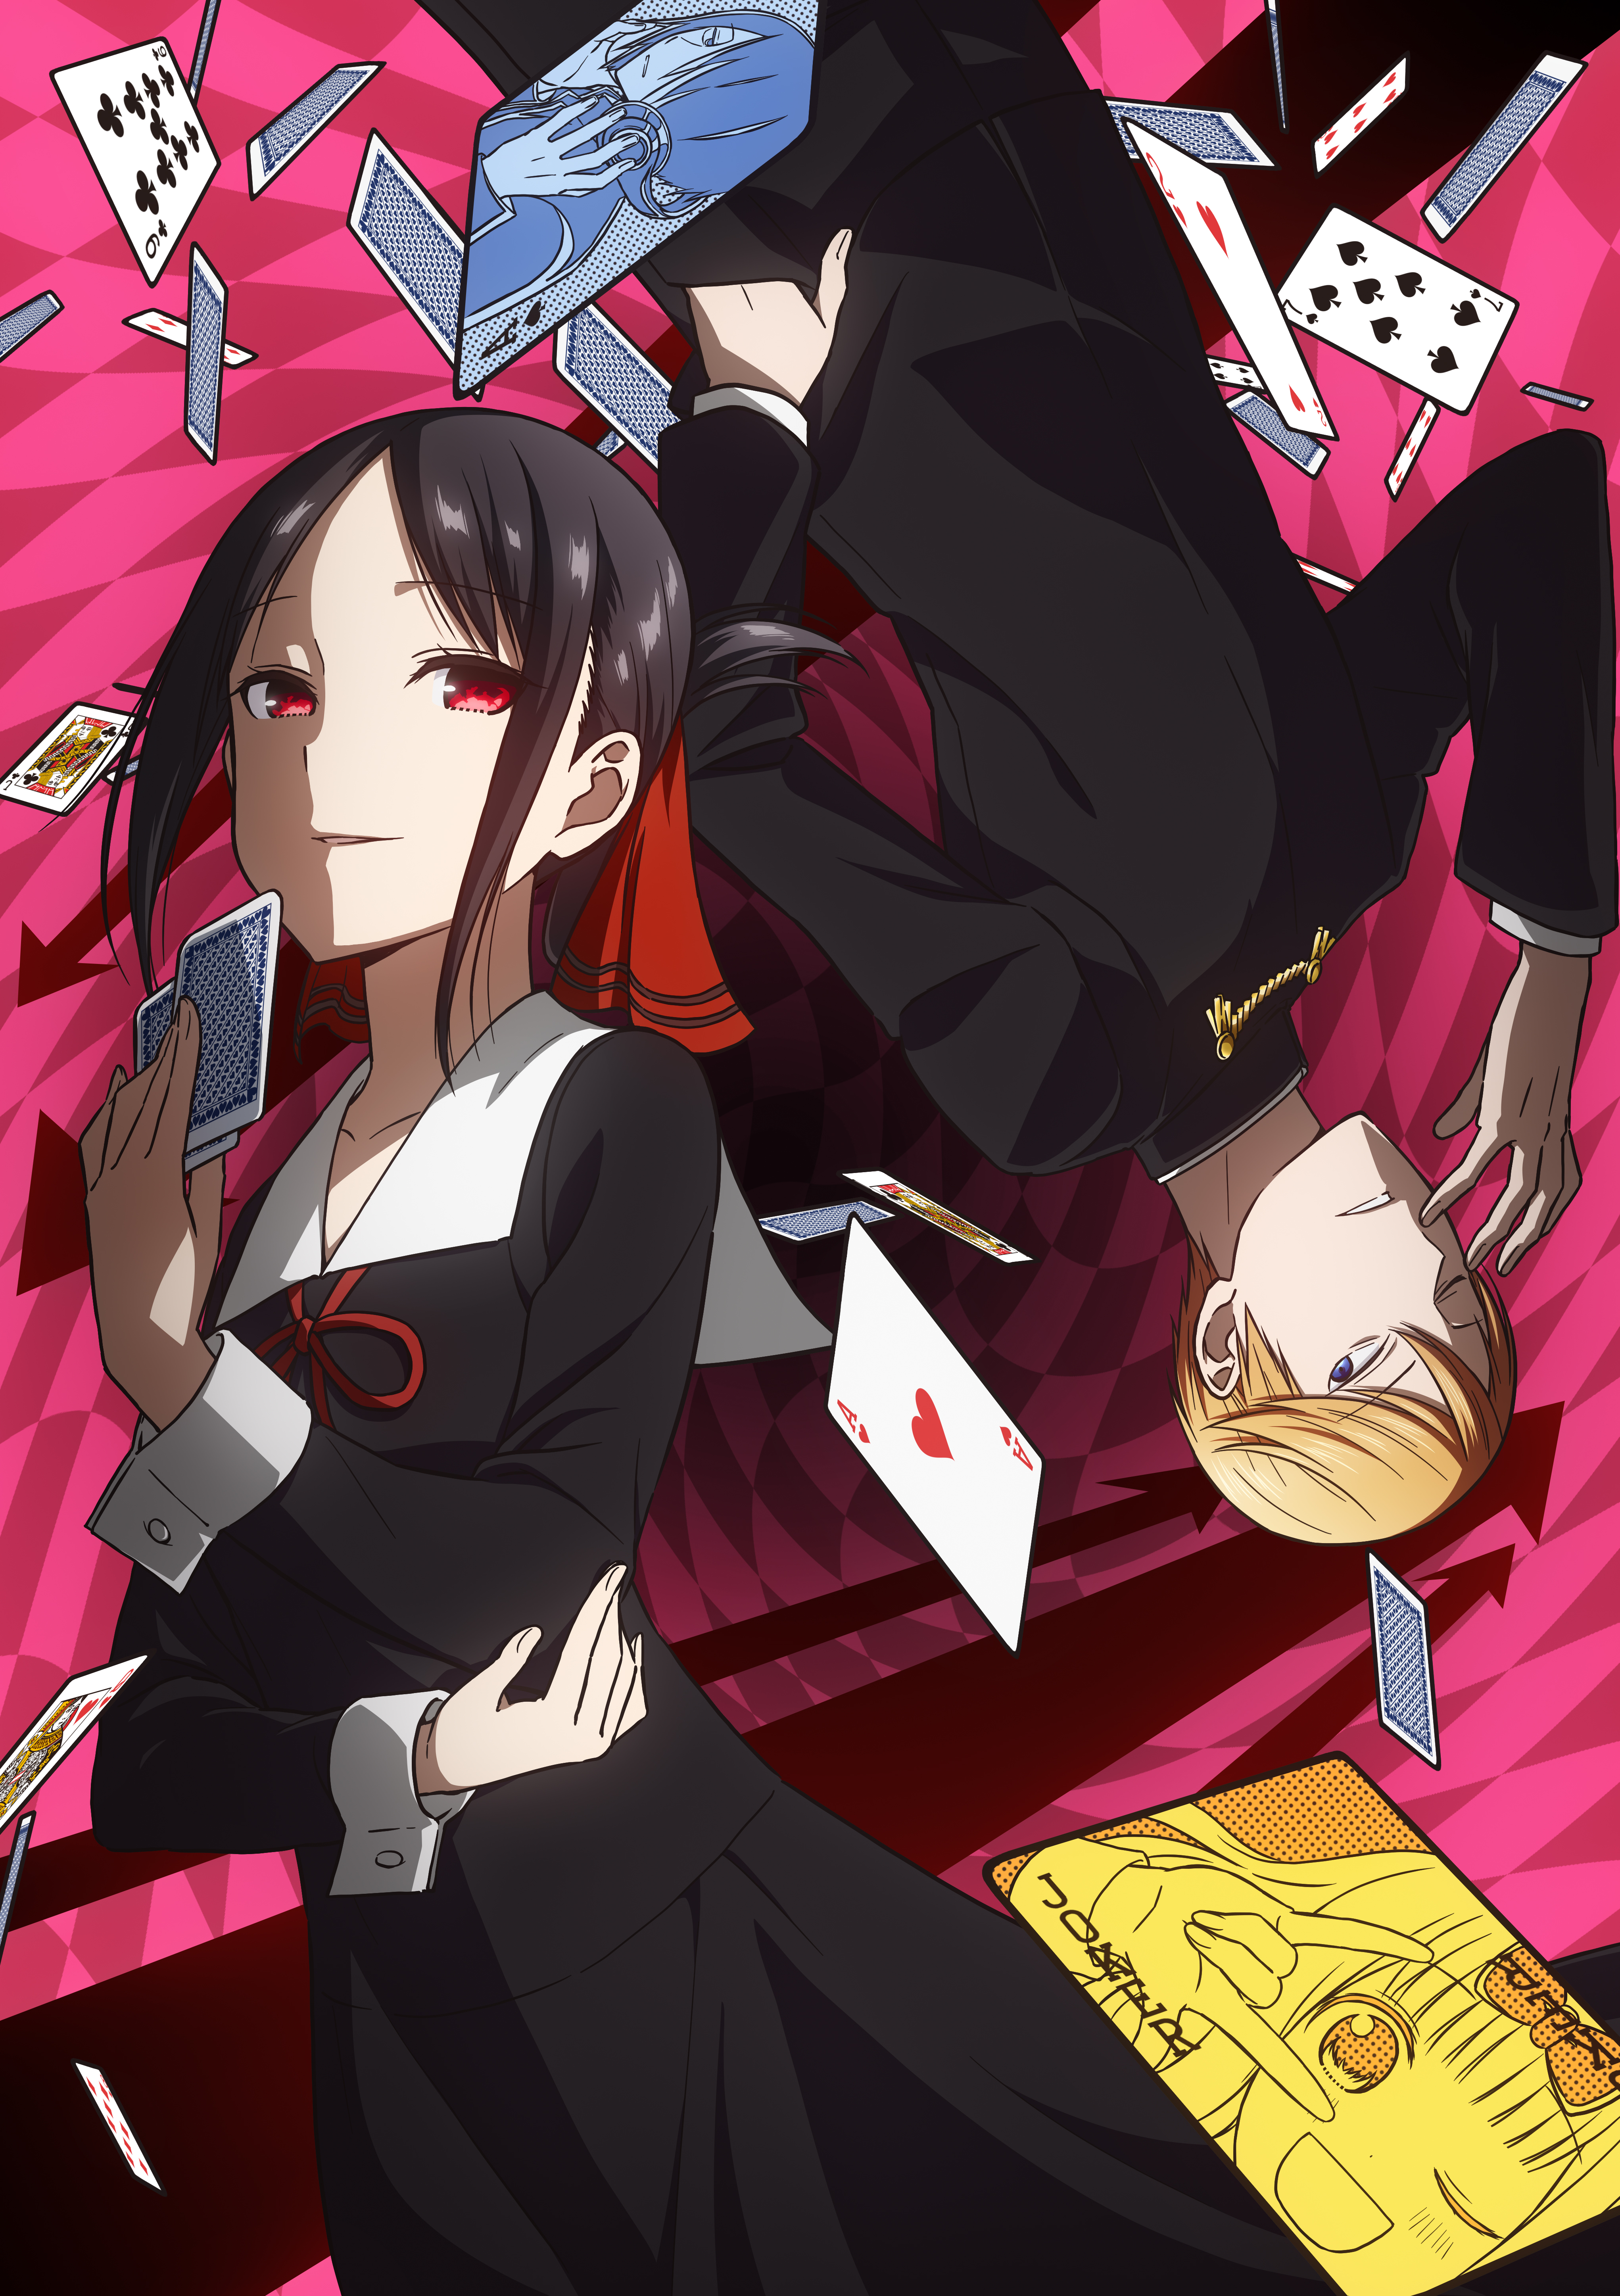 Kaguya-sama: Ultra Romantic Gets Special Ending Theme in Episode 5